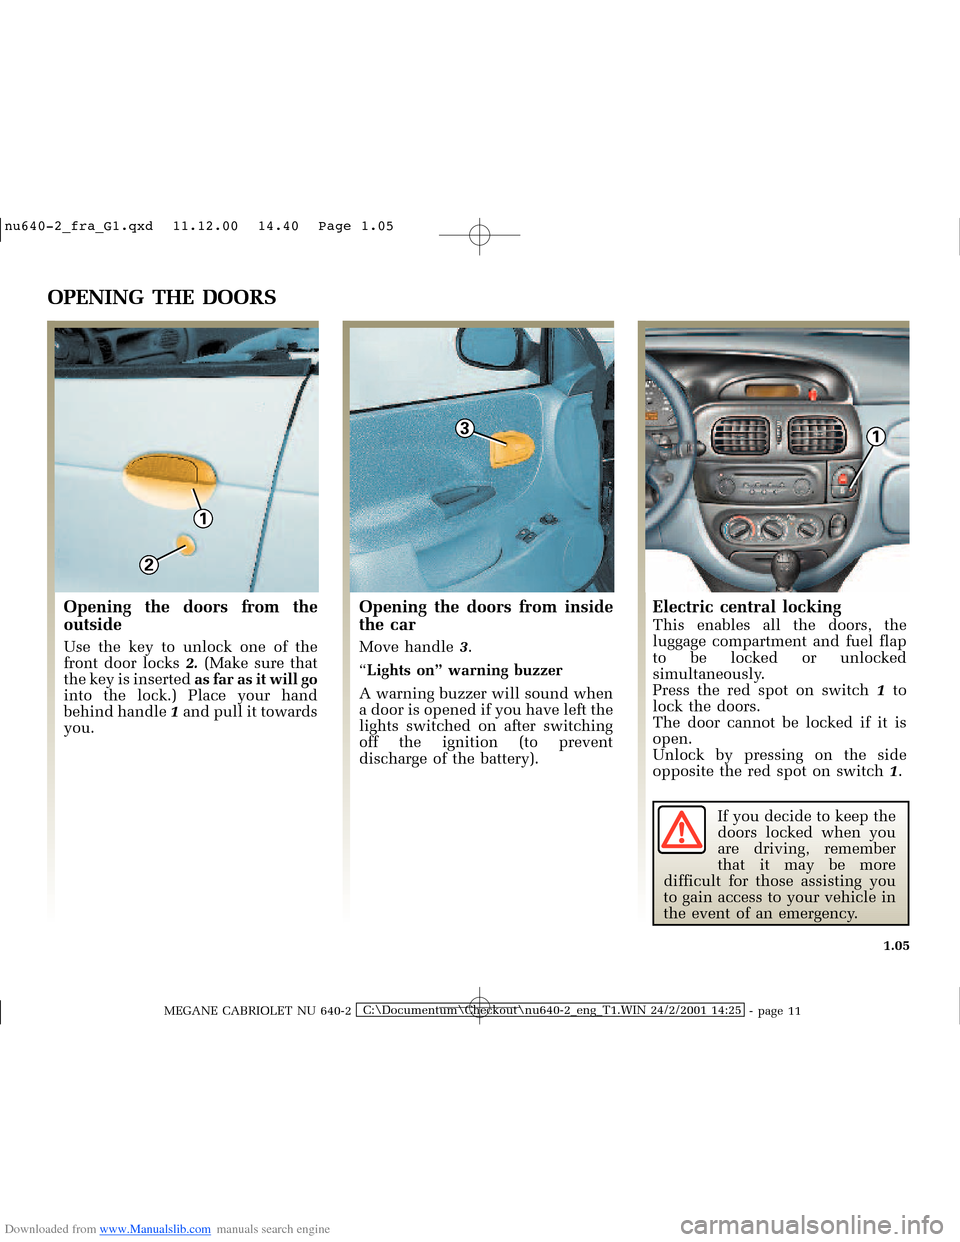 RENAULT MEGANE 2000 X64 / 1.G Owners Manual Downloaded from www.Manualslib.com manuals search engine 1
2
31
�Q�X������B�I�U�D�B�*���T�[�G� � ��������� � ������ � �3�D�J�H� ����
MEGANE CABRIOLET NU 640-2C:\Document